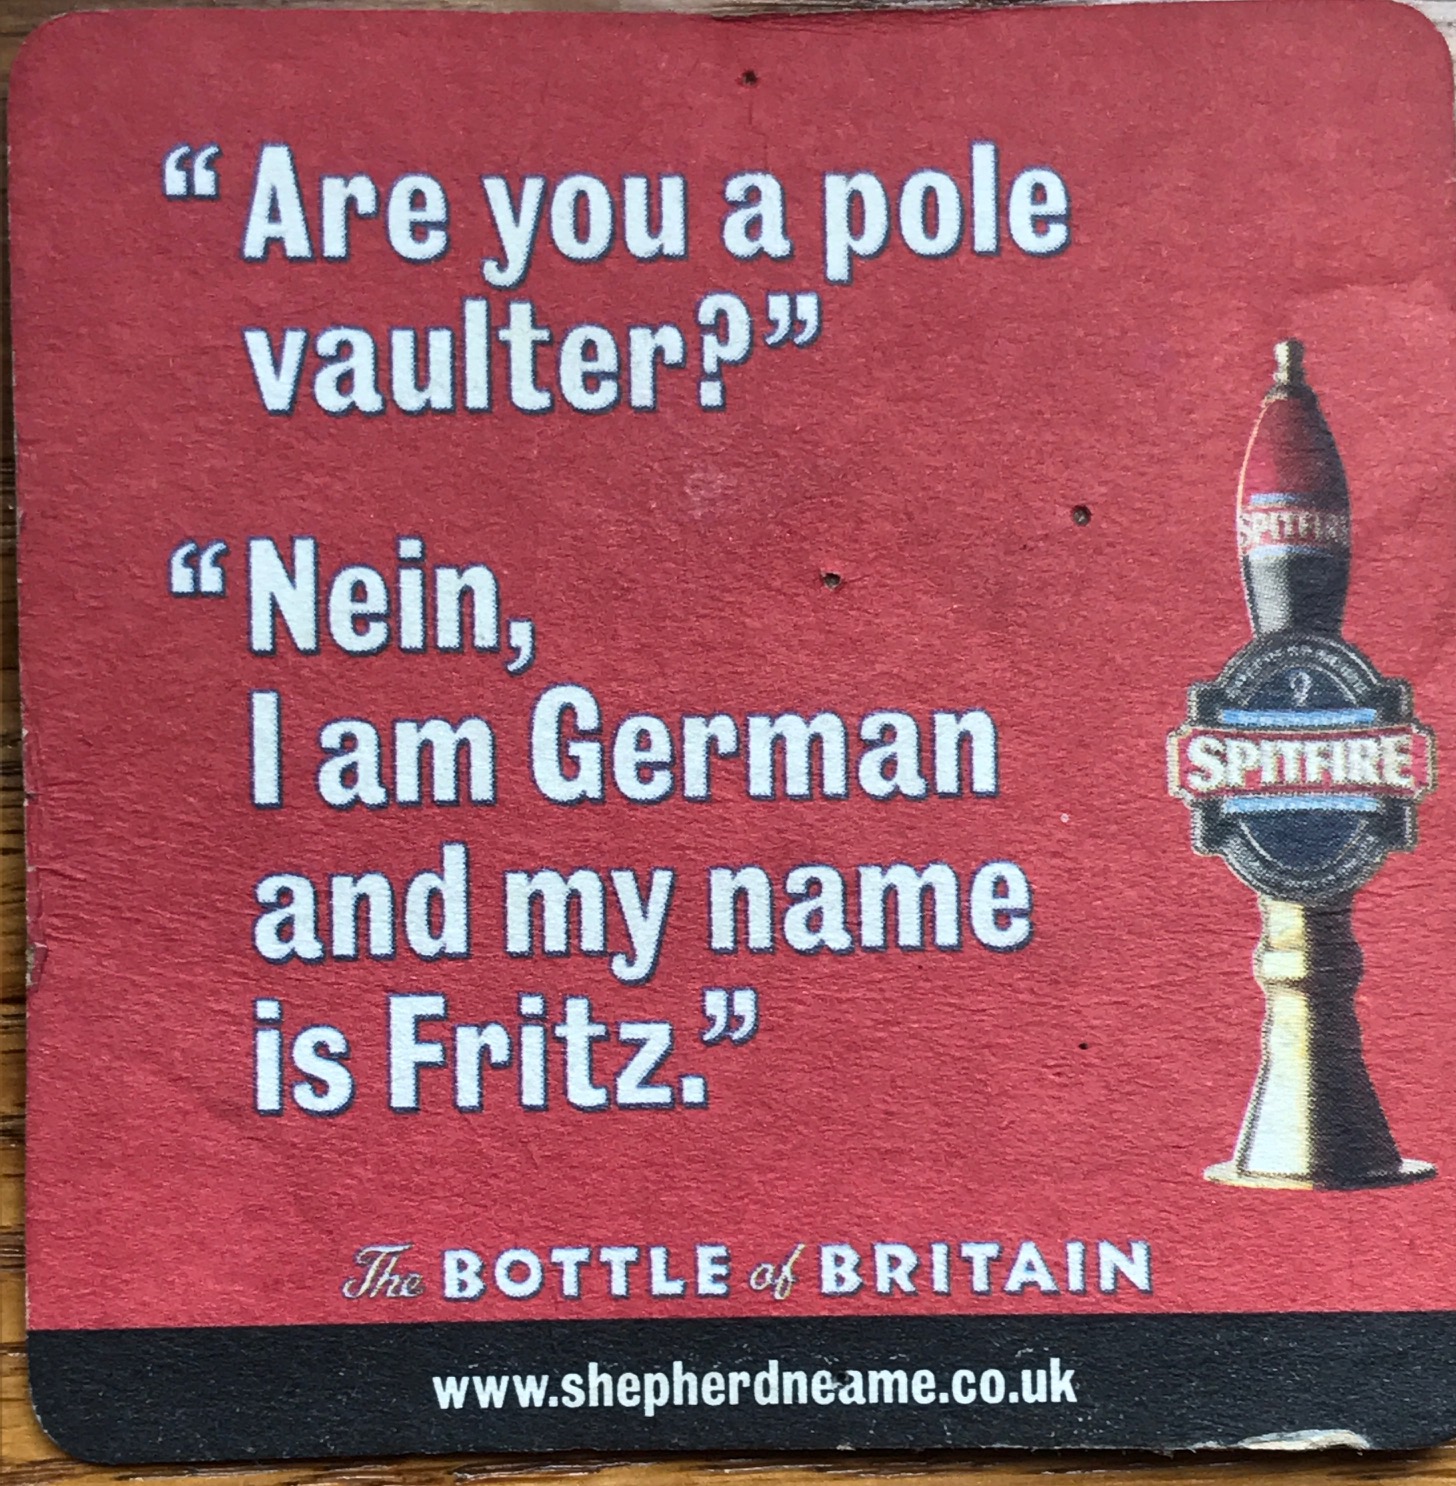 Heatwave: "Are you a pole vaulter?" - "Nein I am German and my name is Fritz."